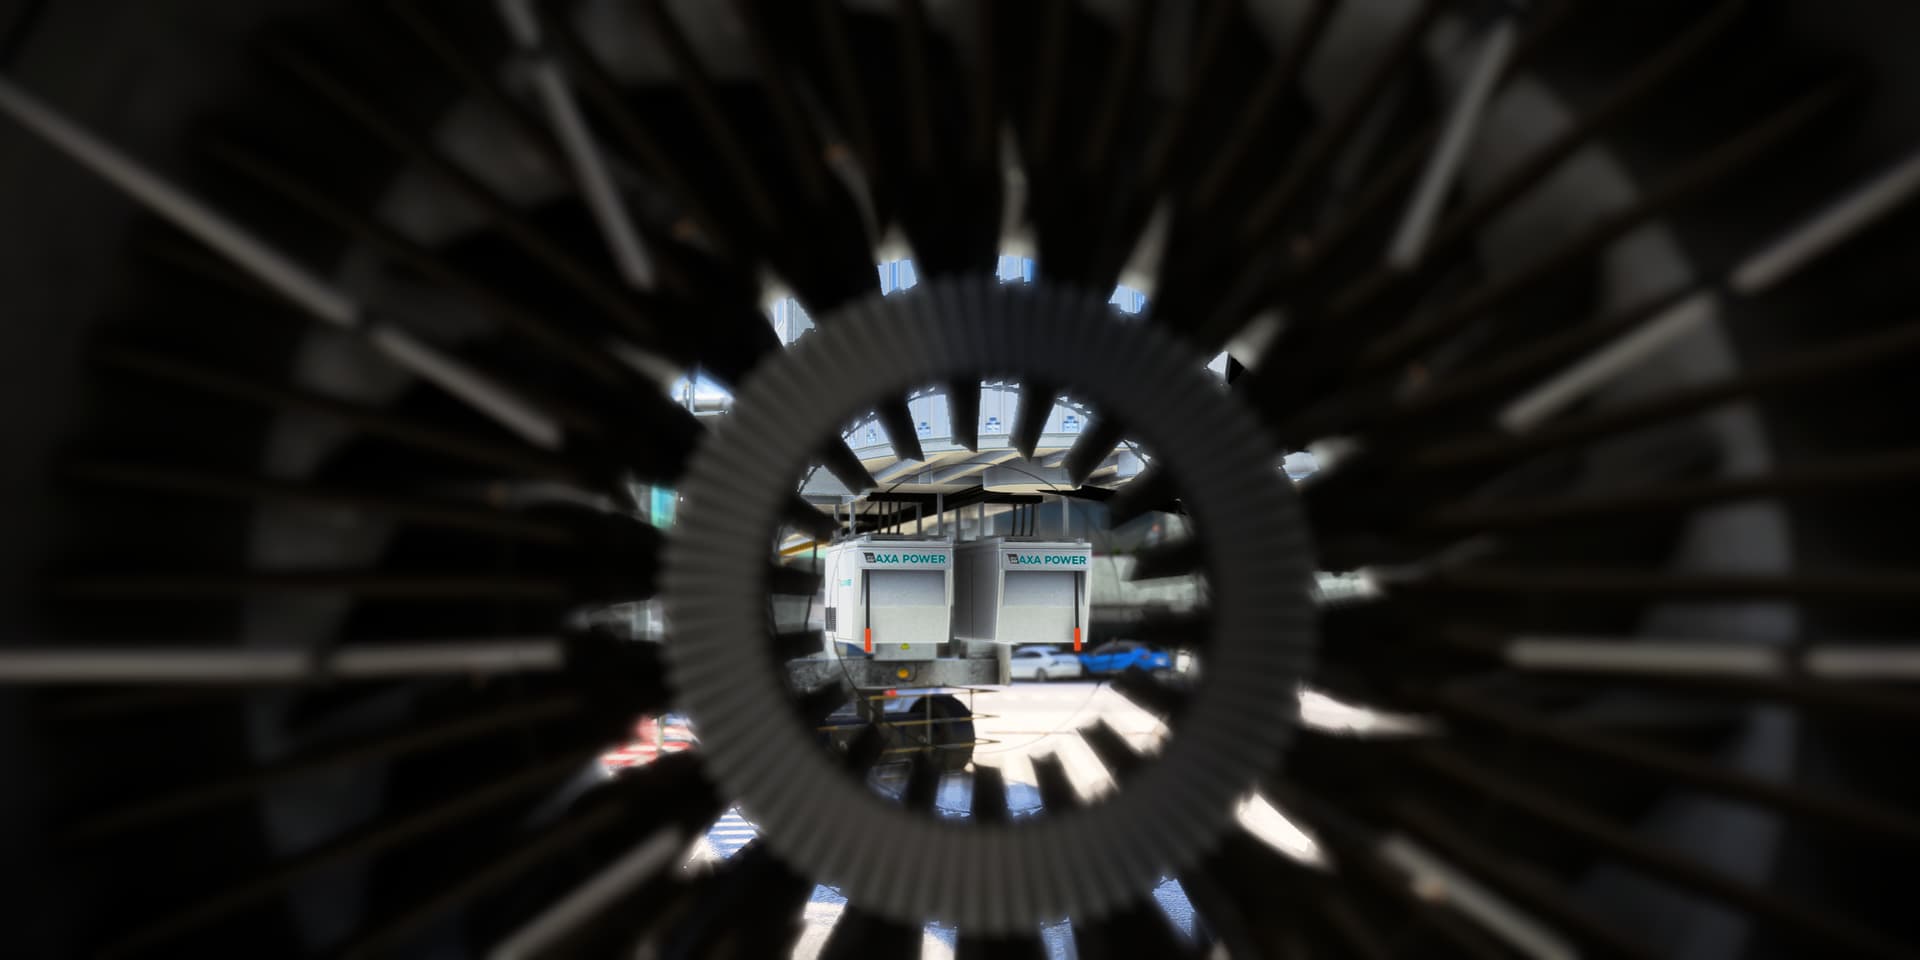 A view from inside the engine of an Airbus A320 NEO facing forwards towards an airport terminal.